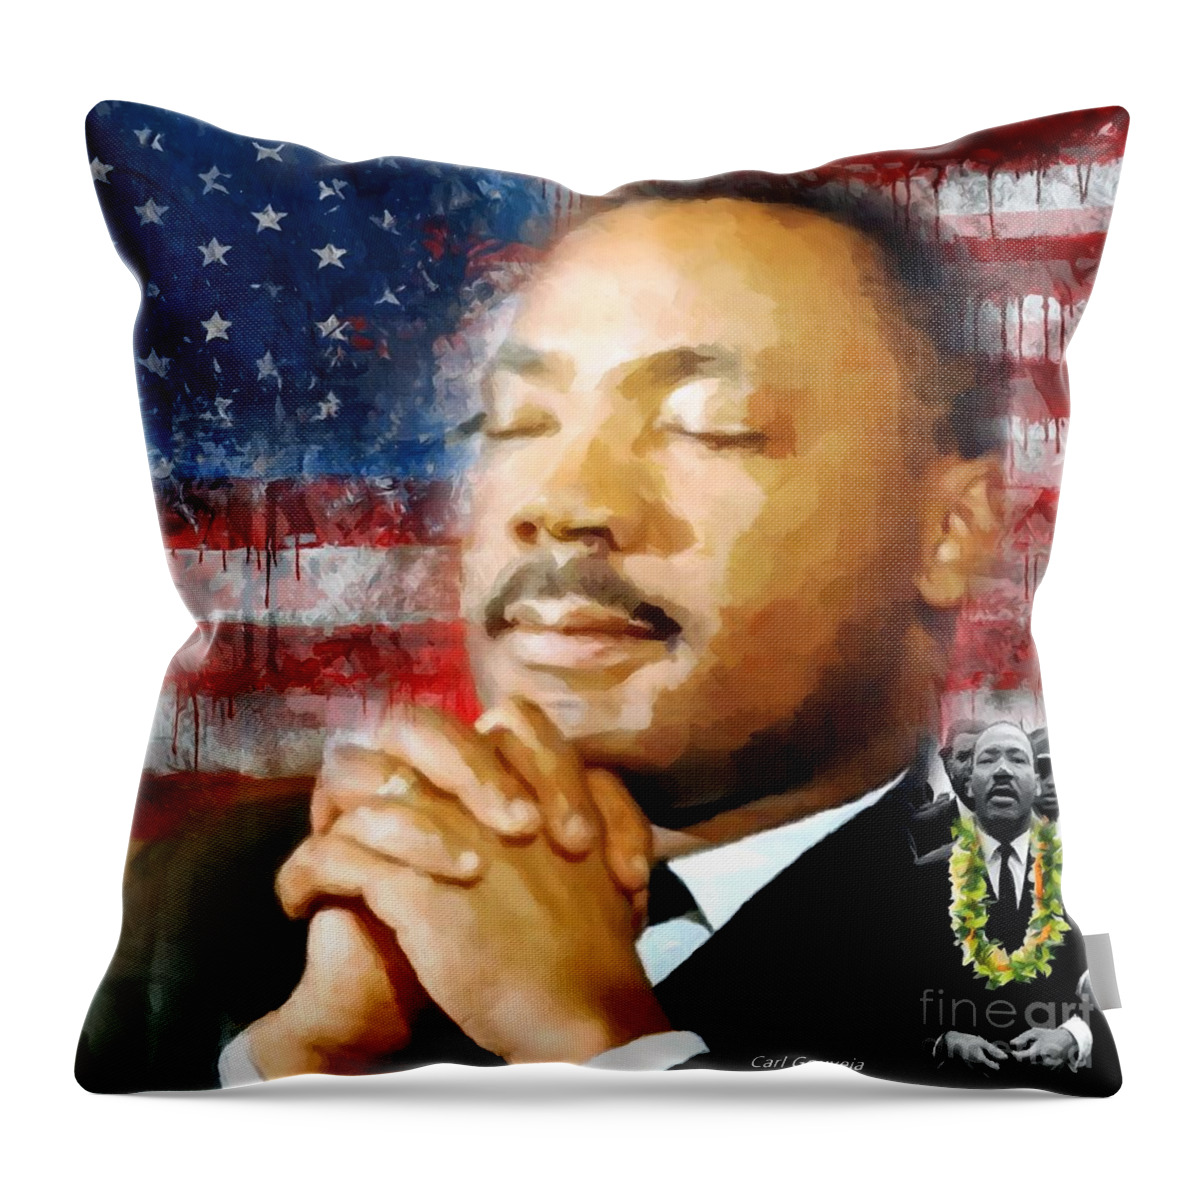 King Throw Pillow featuring the mixed media King by Carl Gouveia